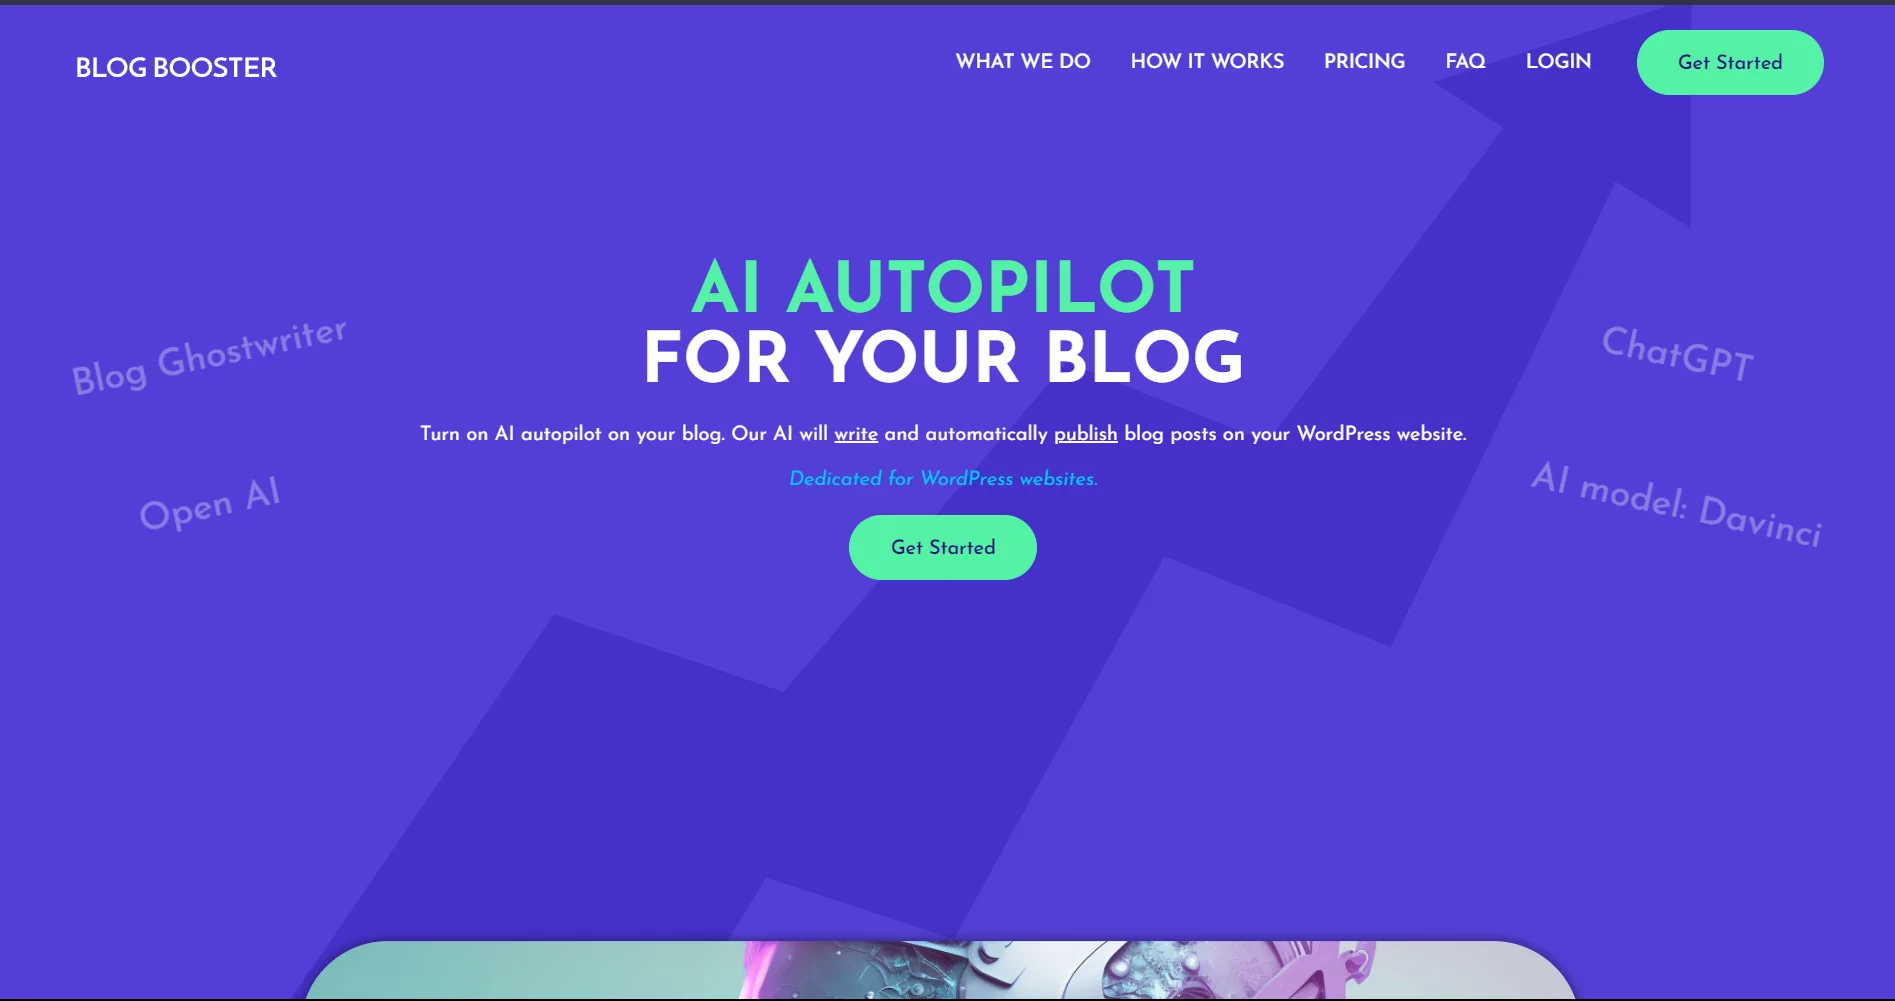  Write and automatically publish blog posts on